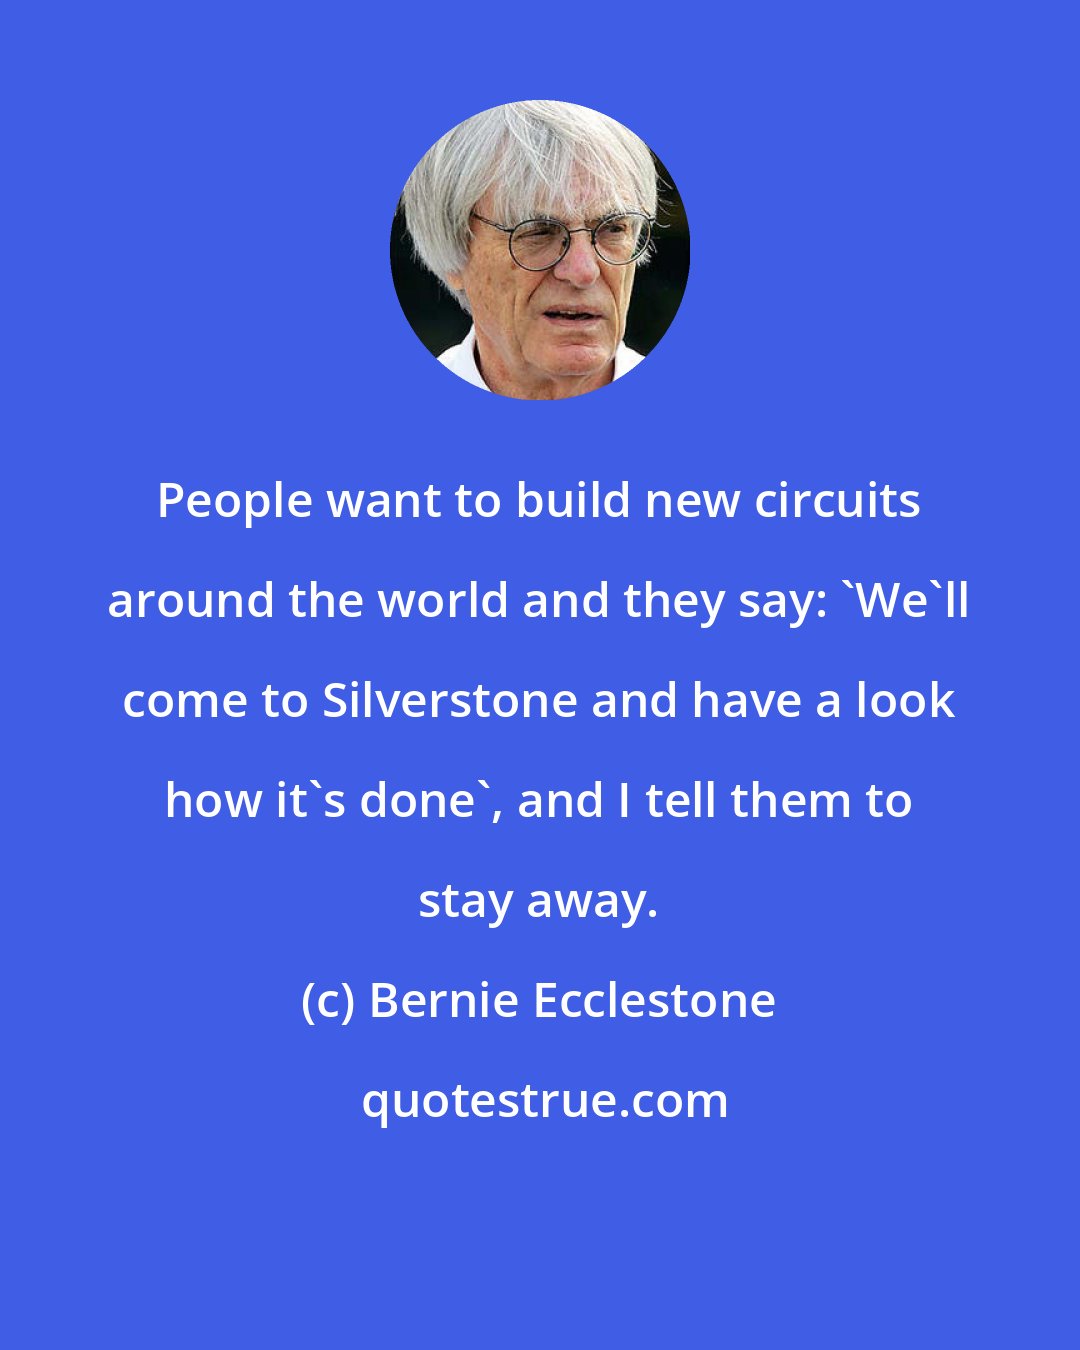 Bernie Ecclestone: People want to build new circuits around the world and they say: 'We'll come to Silverstone and have a look how it's done', and I tell them to stay away.